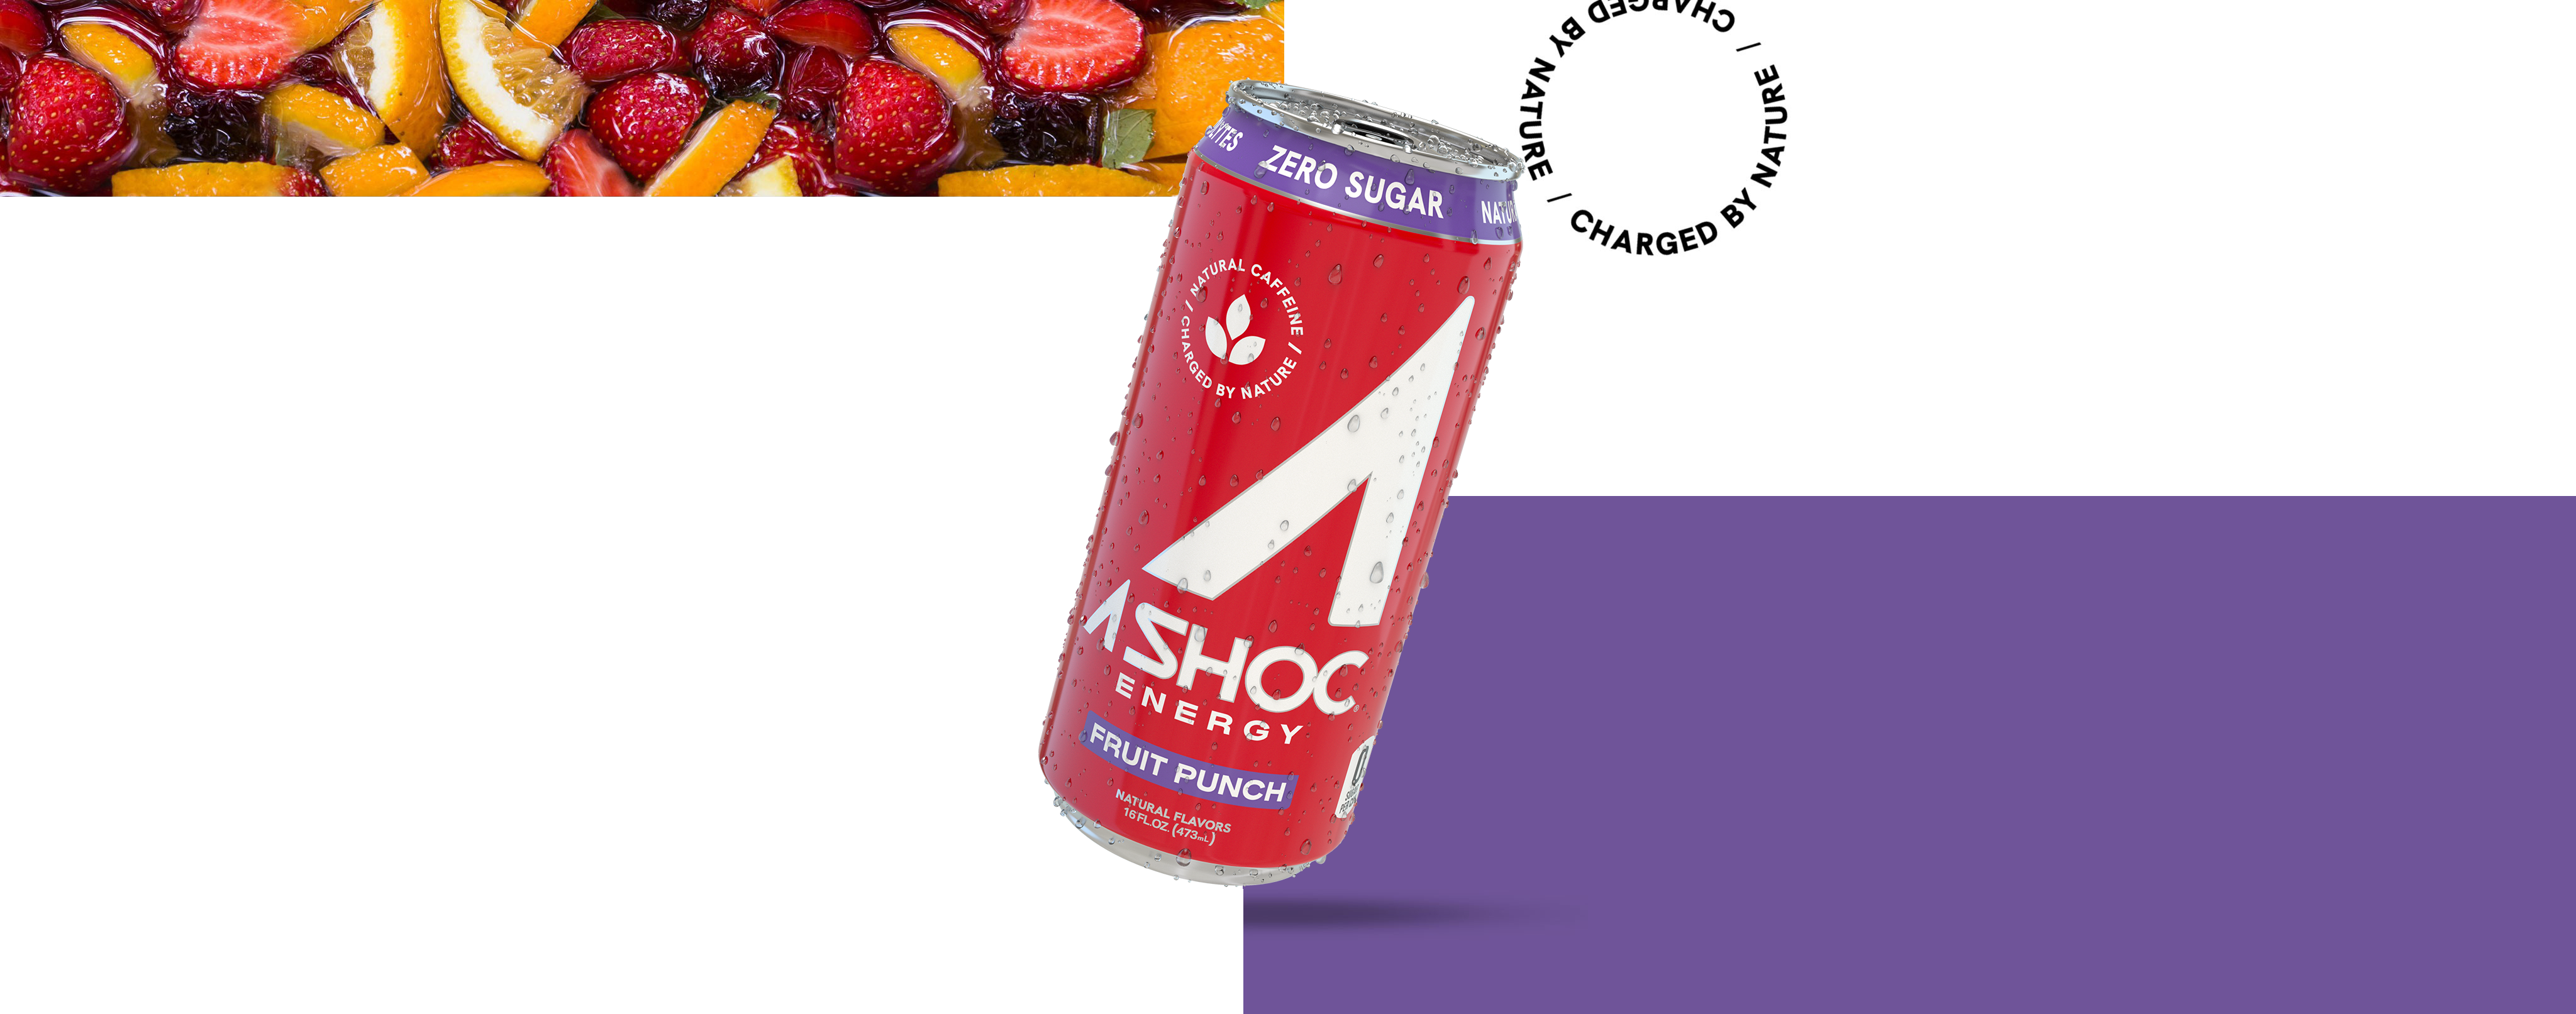 A red can with purple and white lettering that says zero sugar, natural caffeine / created by nature, Ashoc performance energy, Fruit Punch.